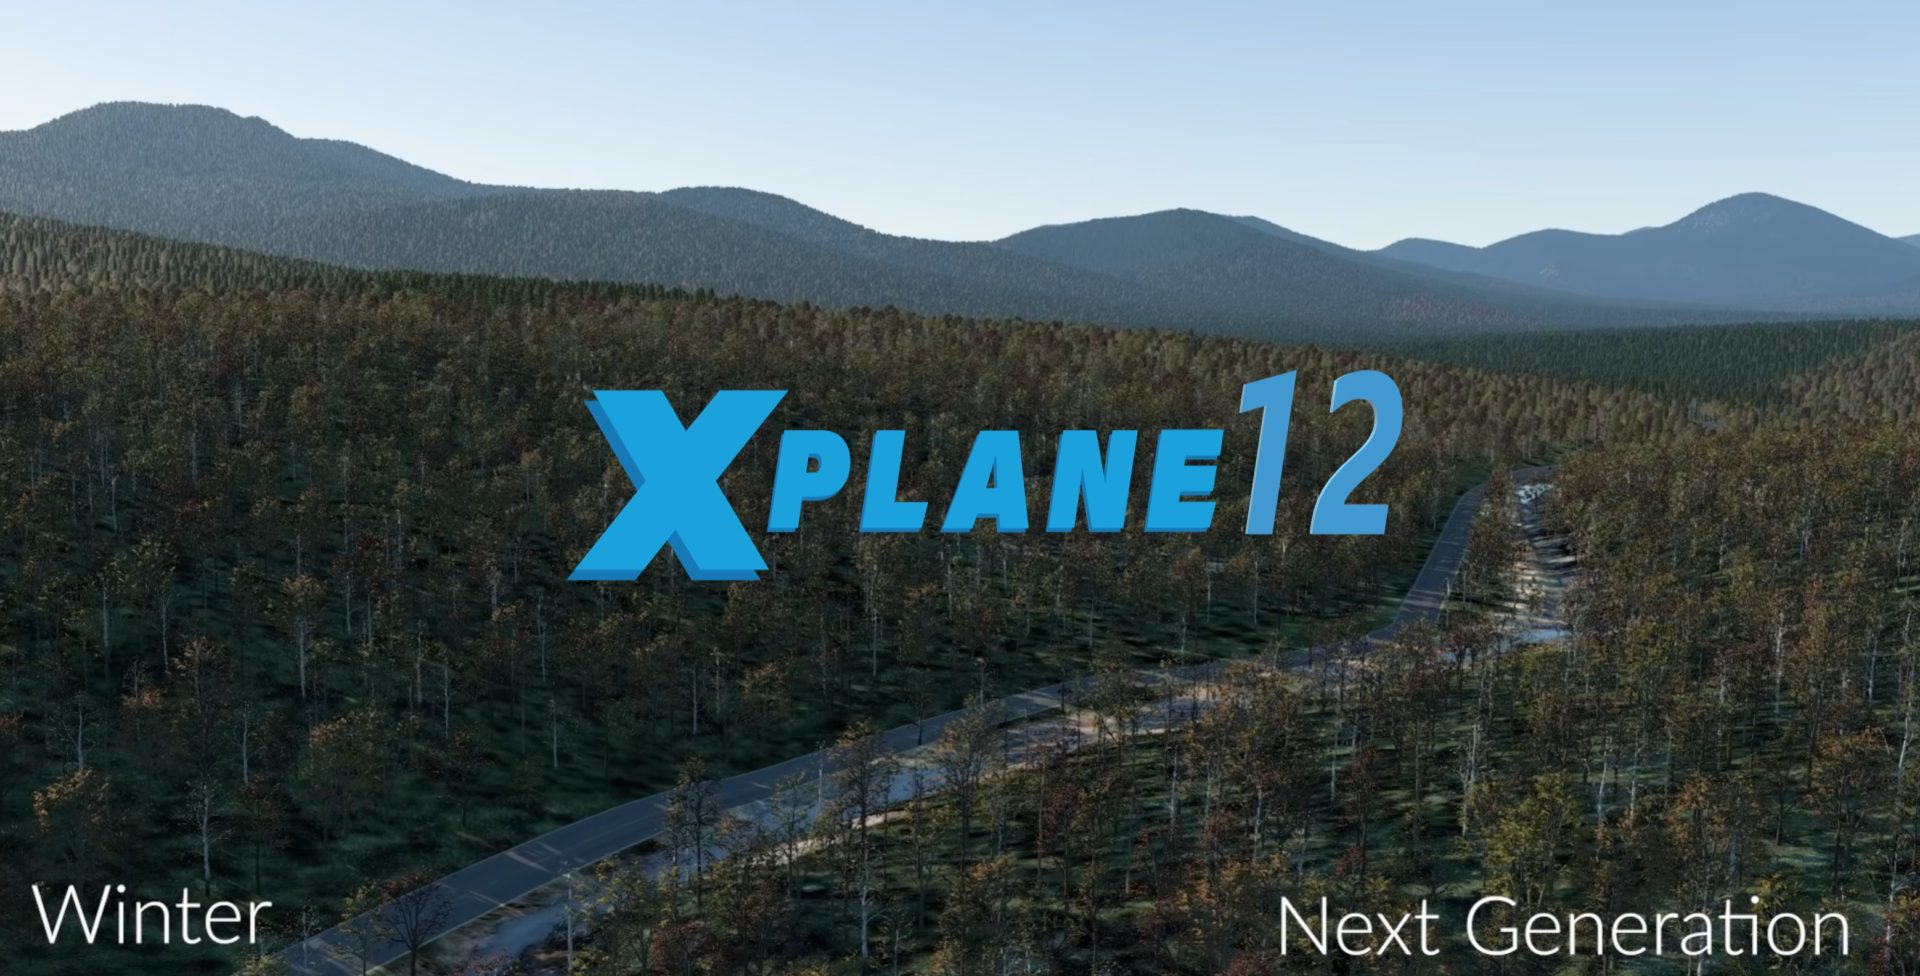 X PLANE 12 Release Date | The IMMINENT RELEASE of the best FLYING SIM is HERE!